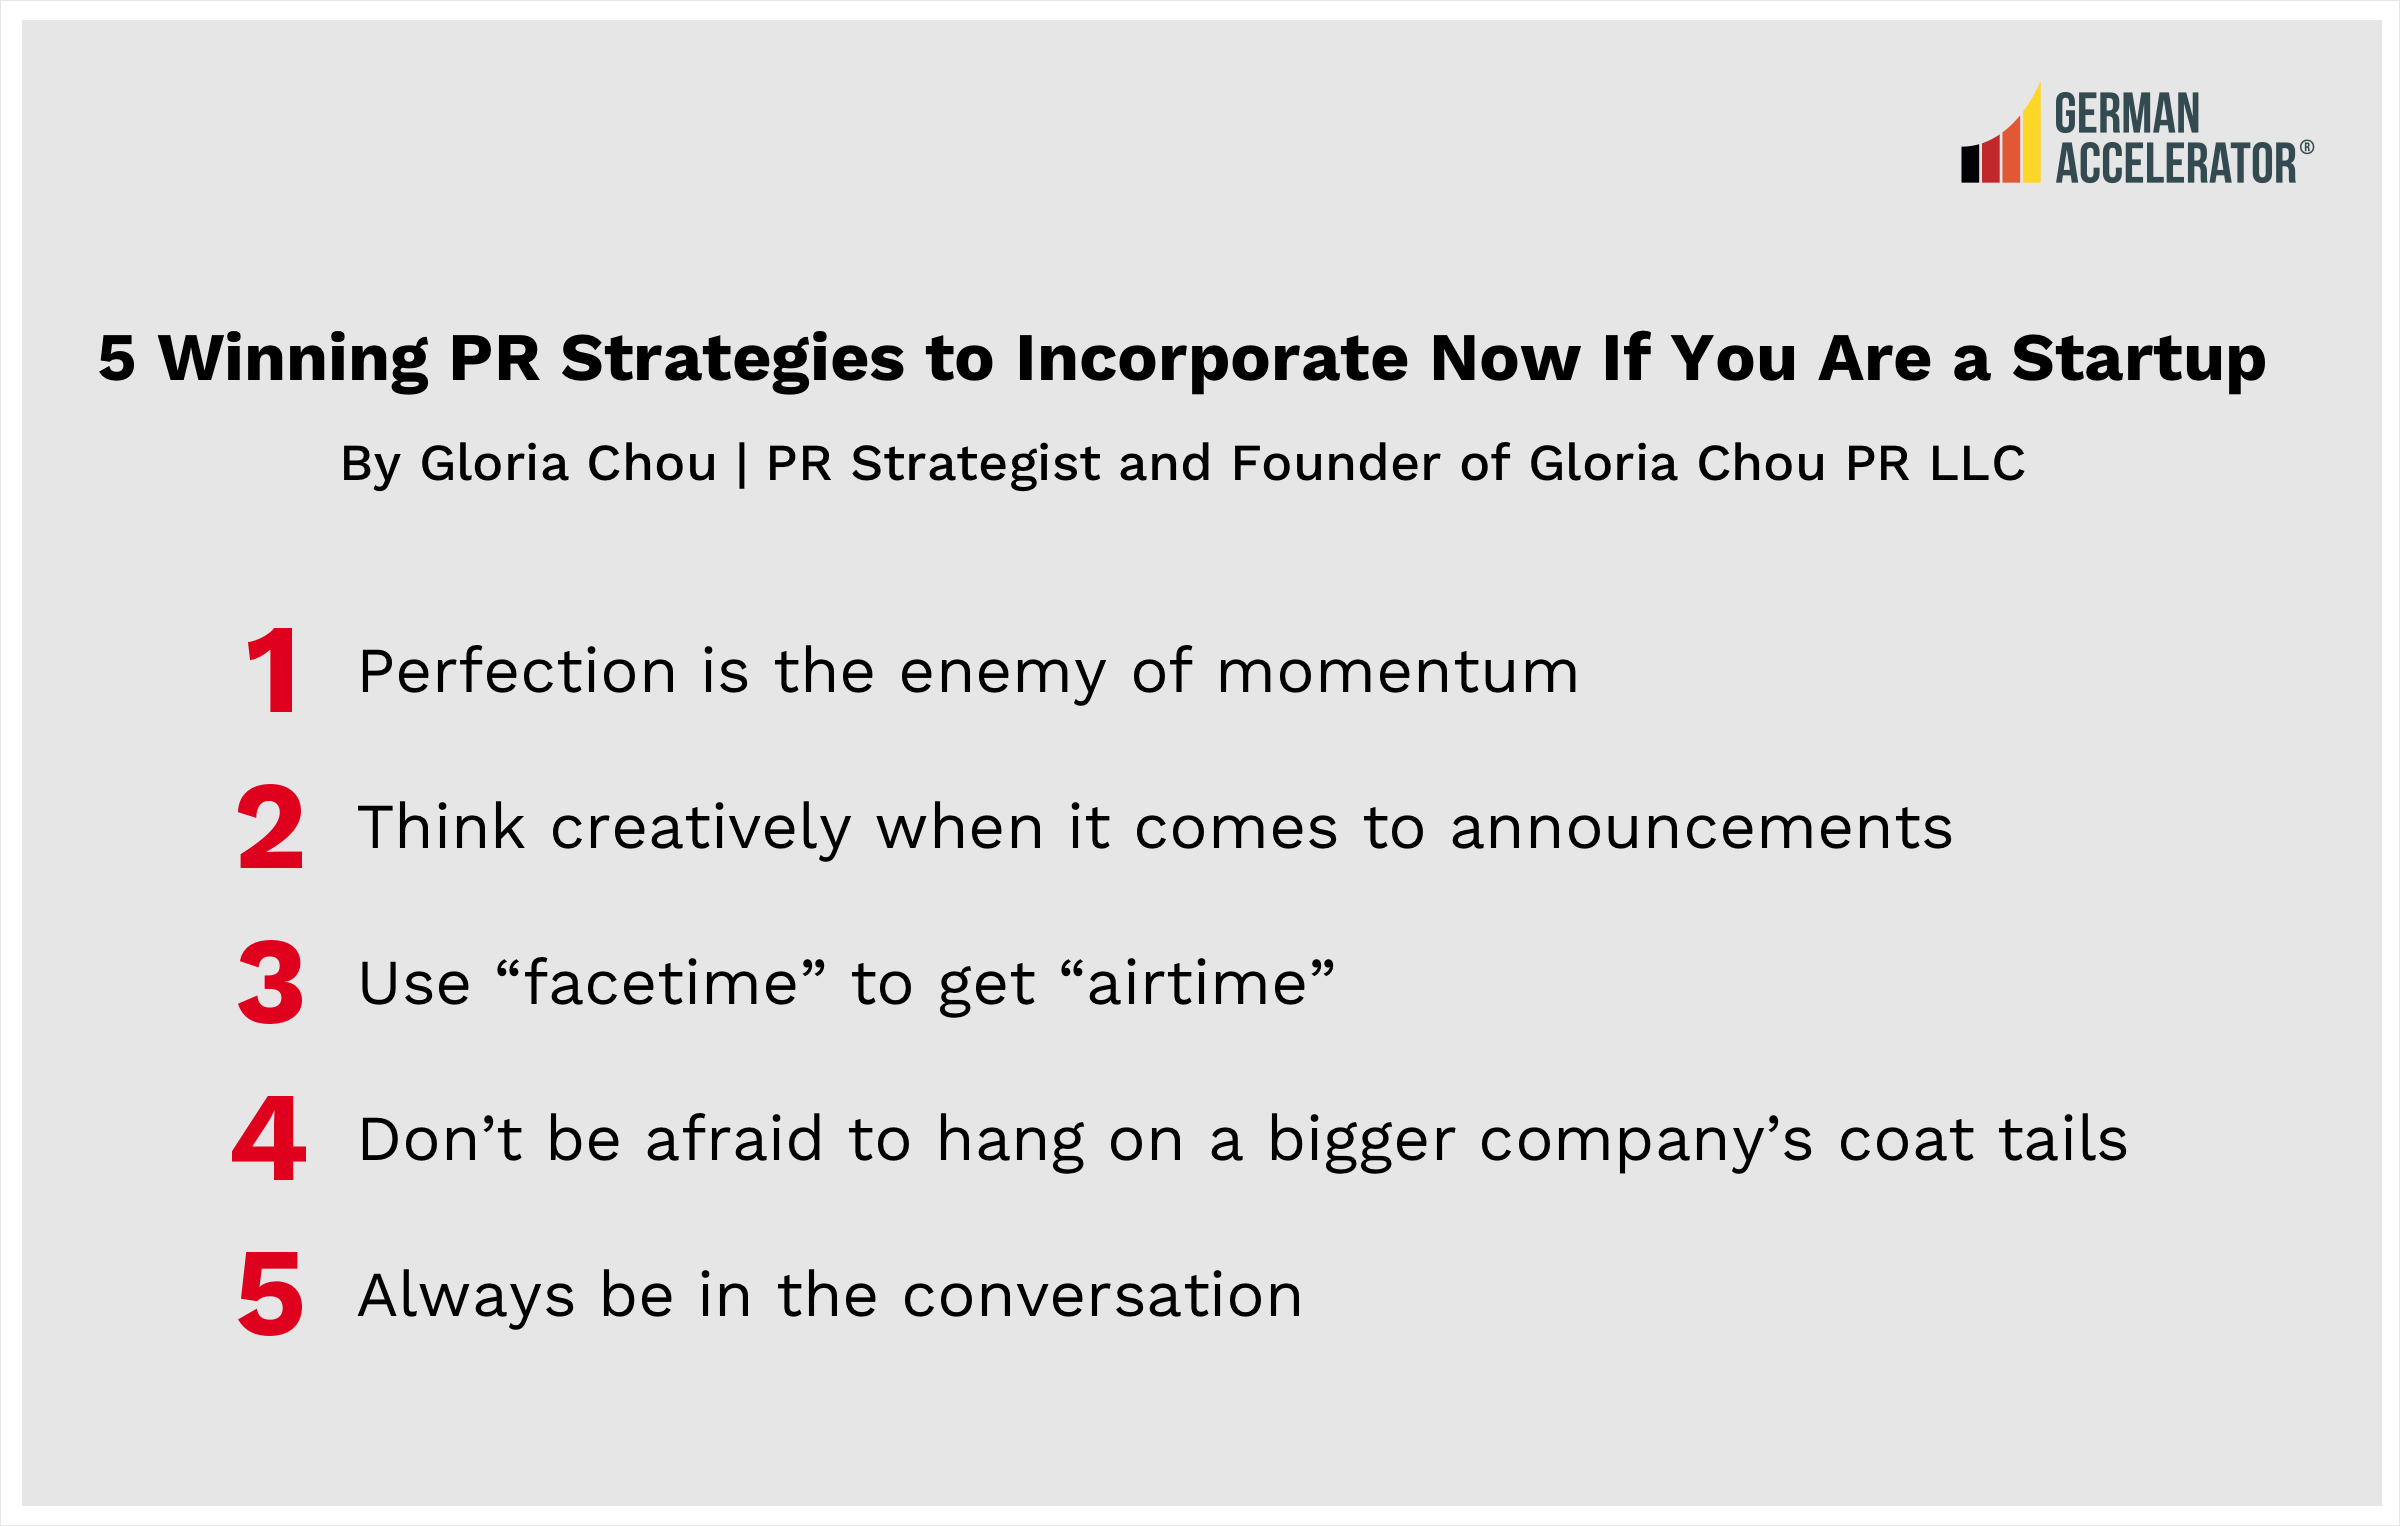 5 Winning PR Strategies to Incorporate Now If You Are a Startup